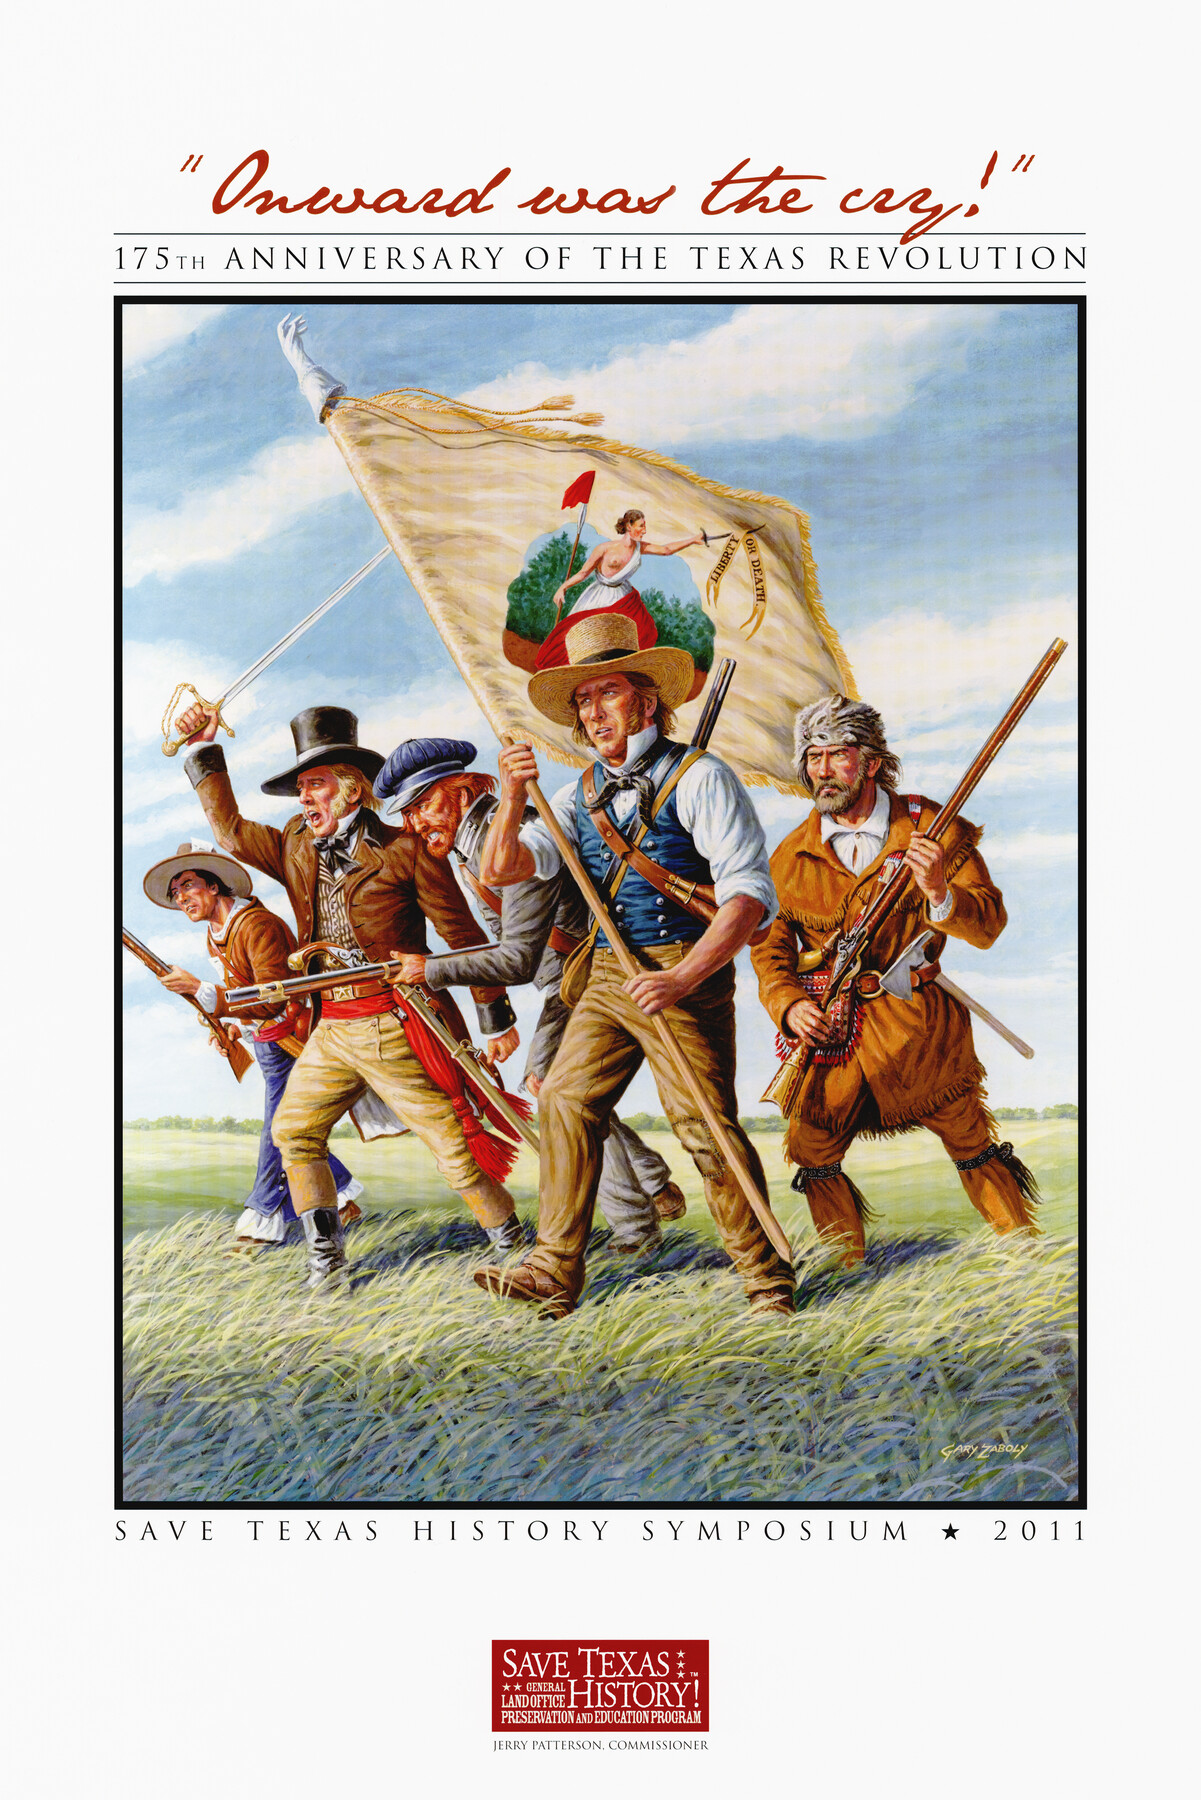 97132, Commemorative Poster: "Onward was the cry!" the 175th Anniversary of the Texas Revolution, Save Texas History Collectibles